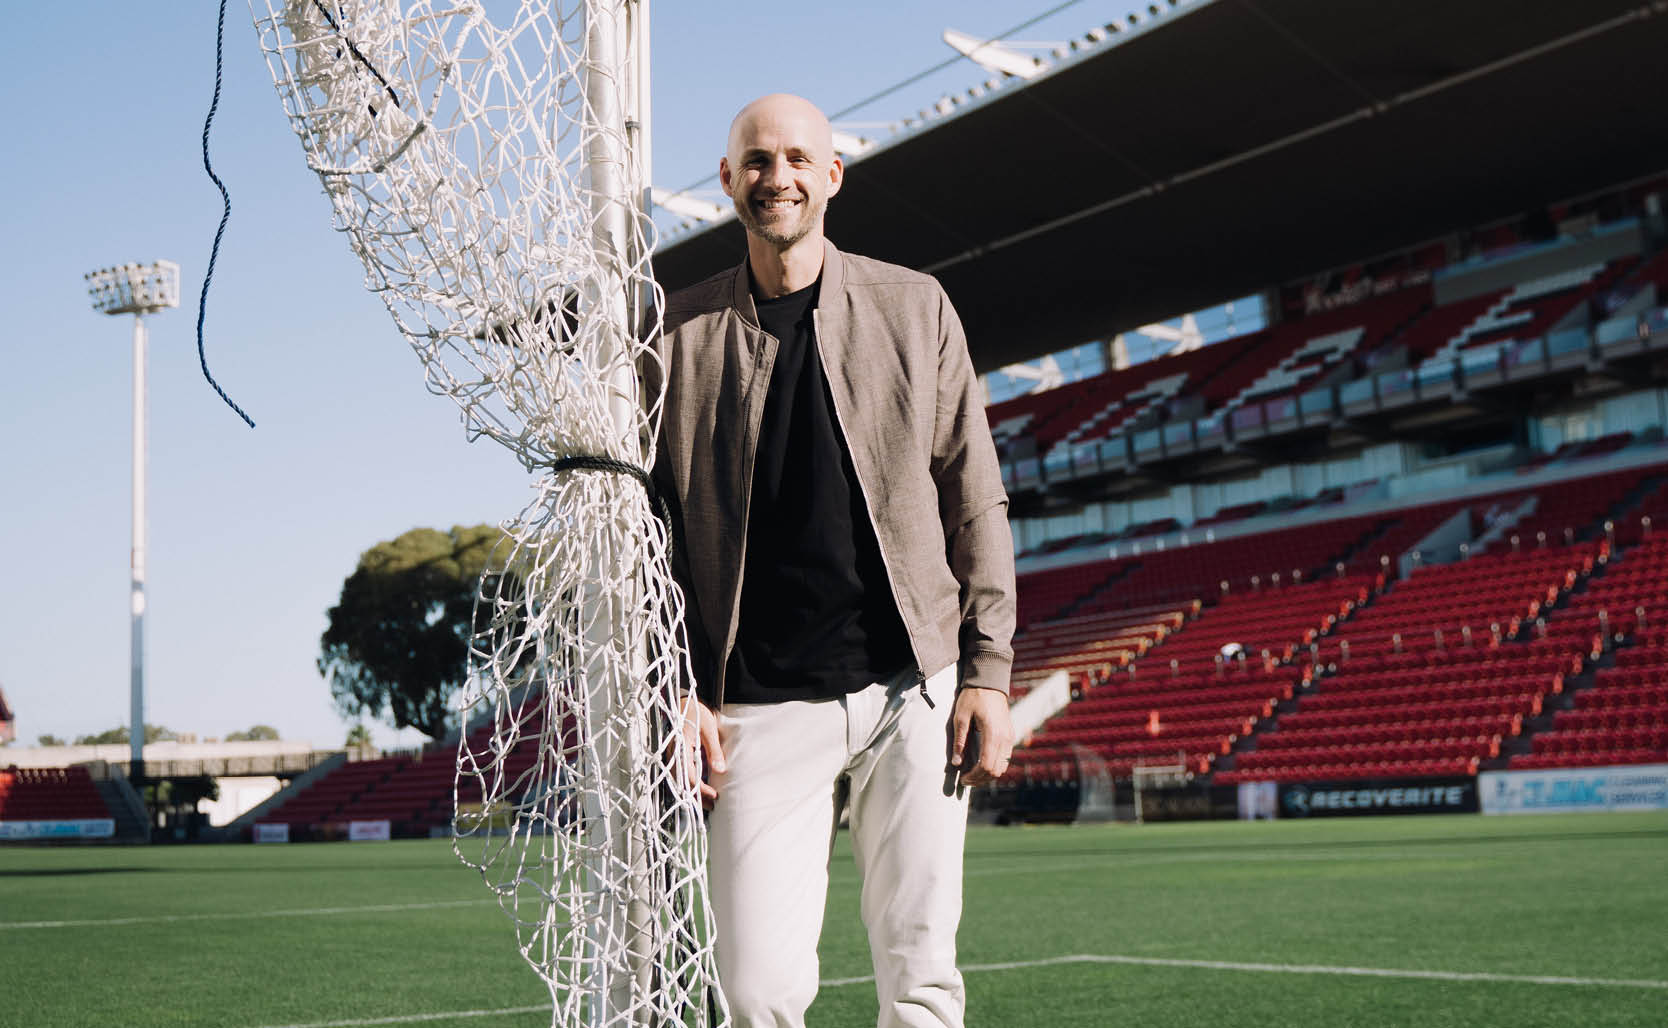 Jarrod Walsh smiling standing next to a soccer post wearing beige bomber jacket, black shirt and white chinos 